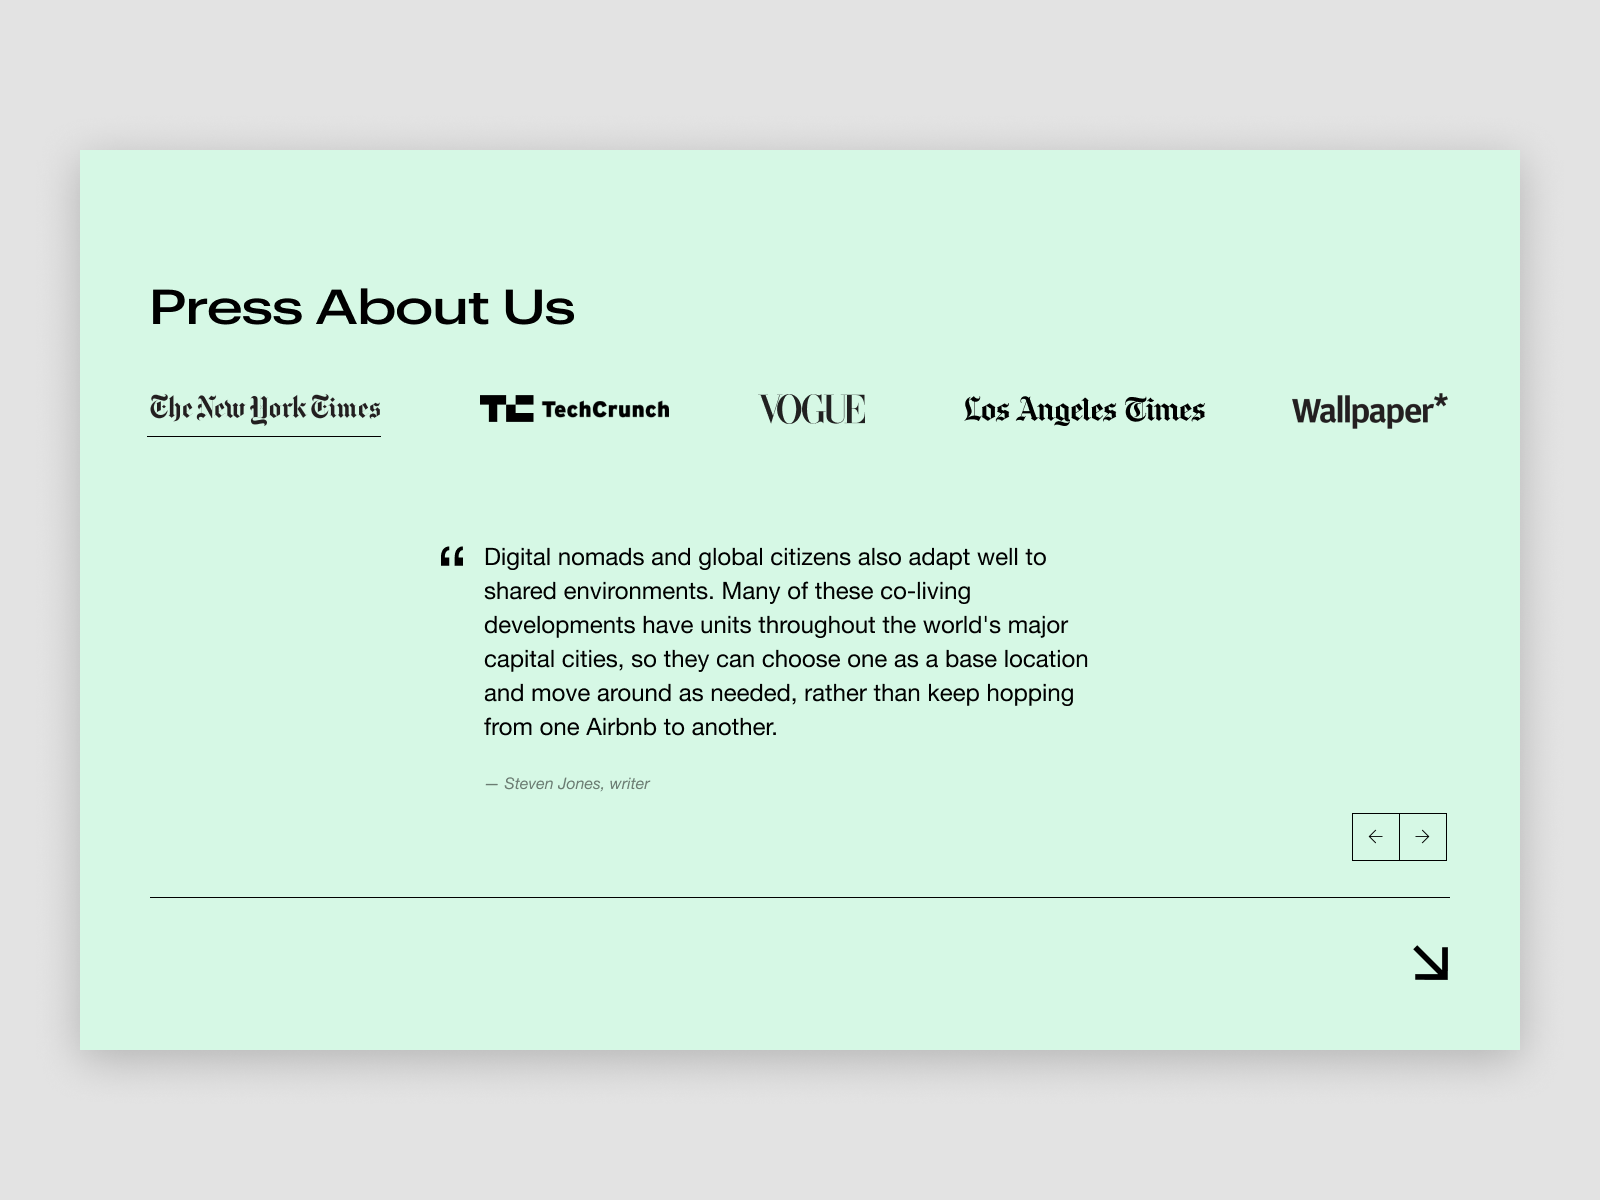 Colivers - Press About Us by Natalia Tomova on Dribbble